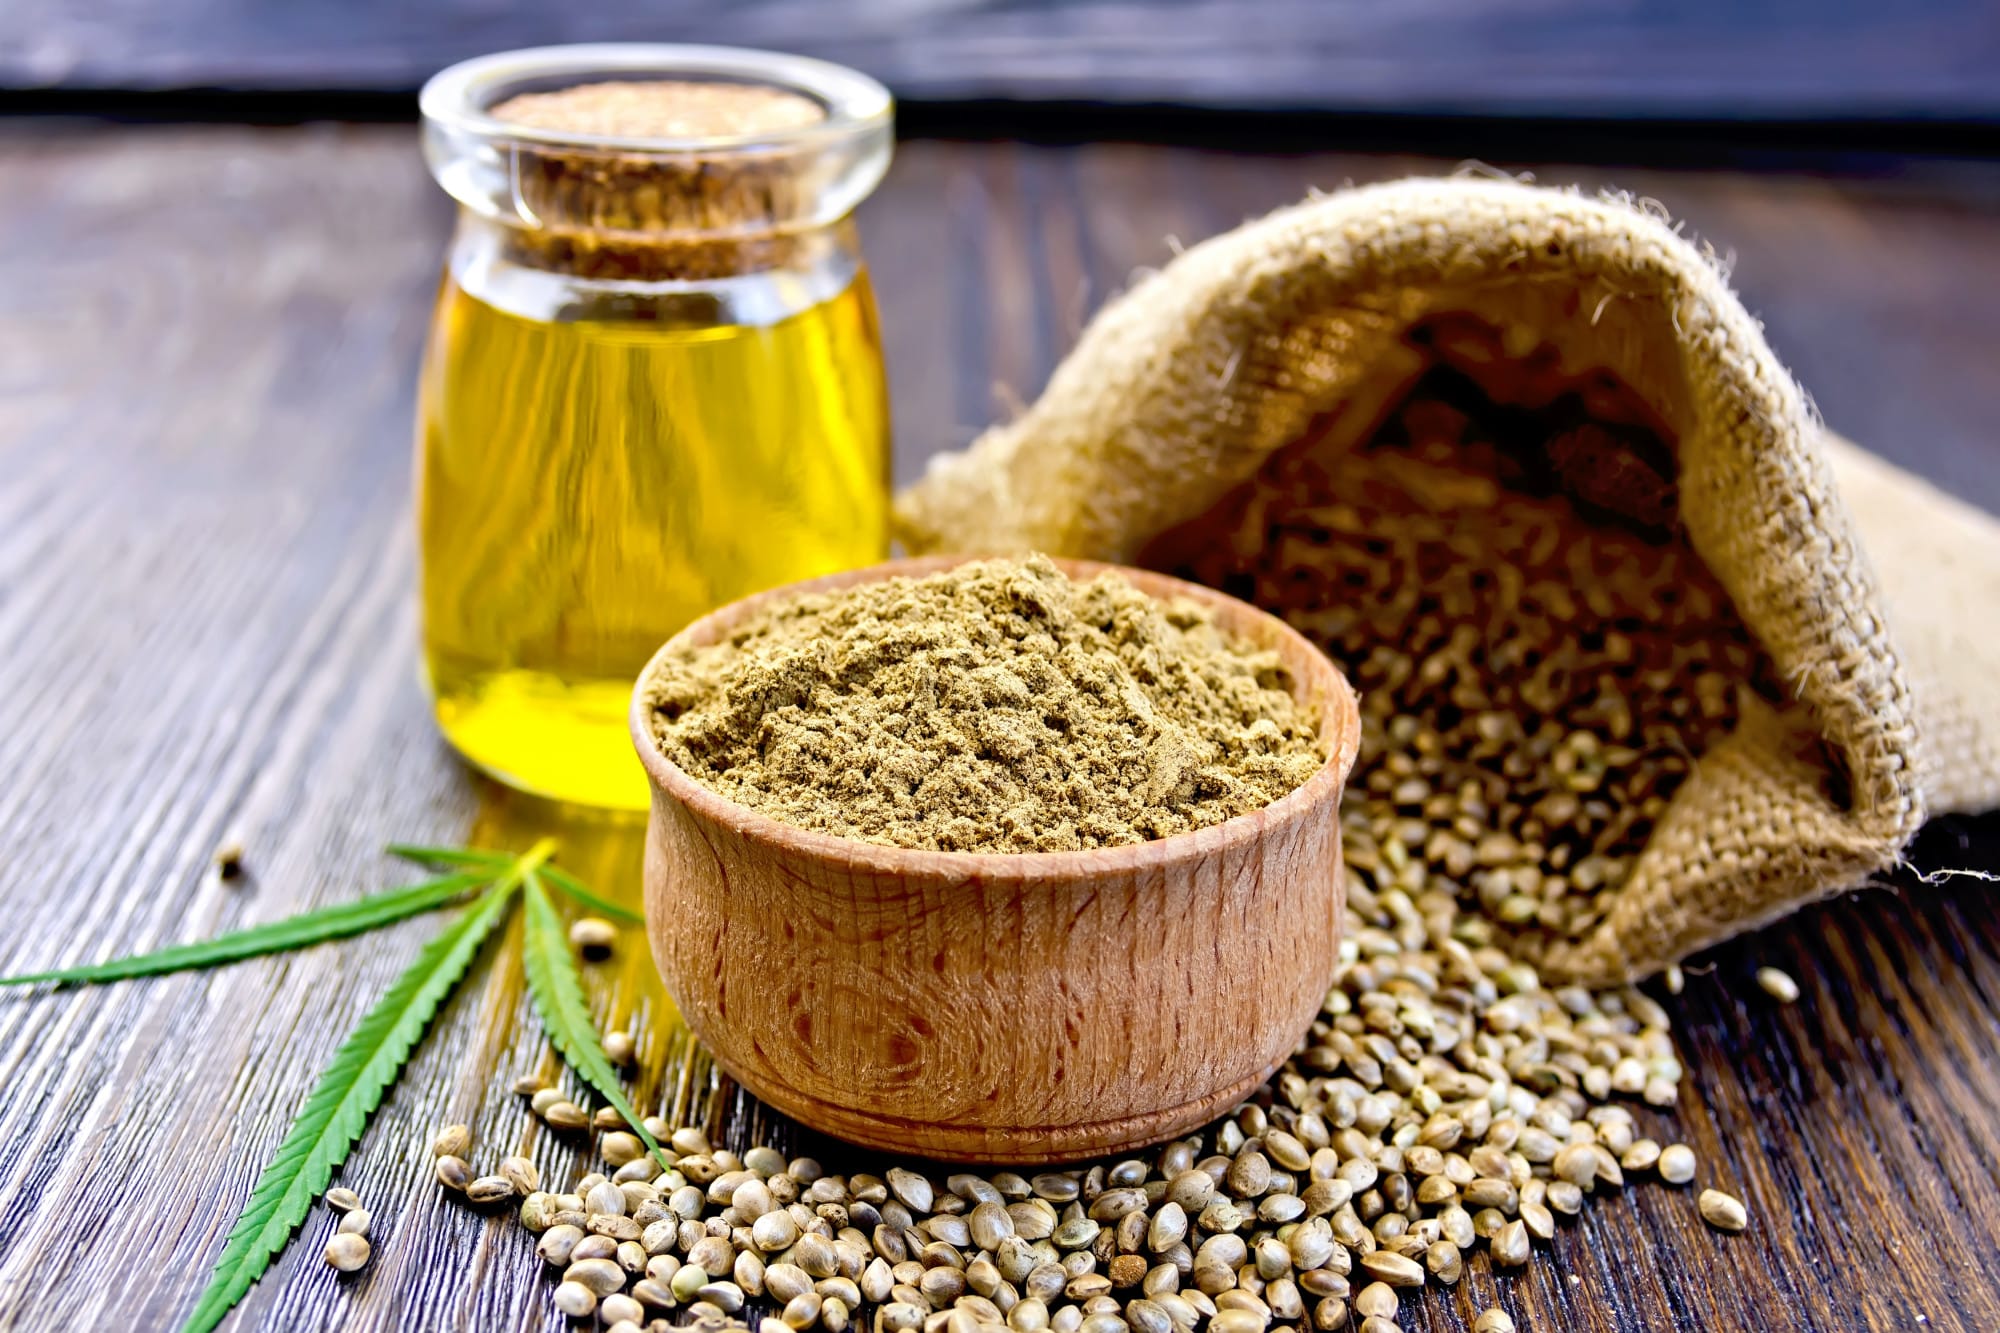 Hemp Seed Oil vs CBD: What Are the Differences?